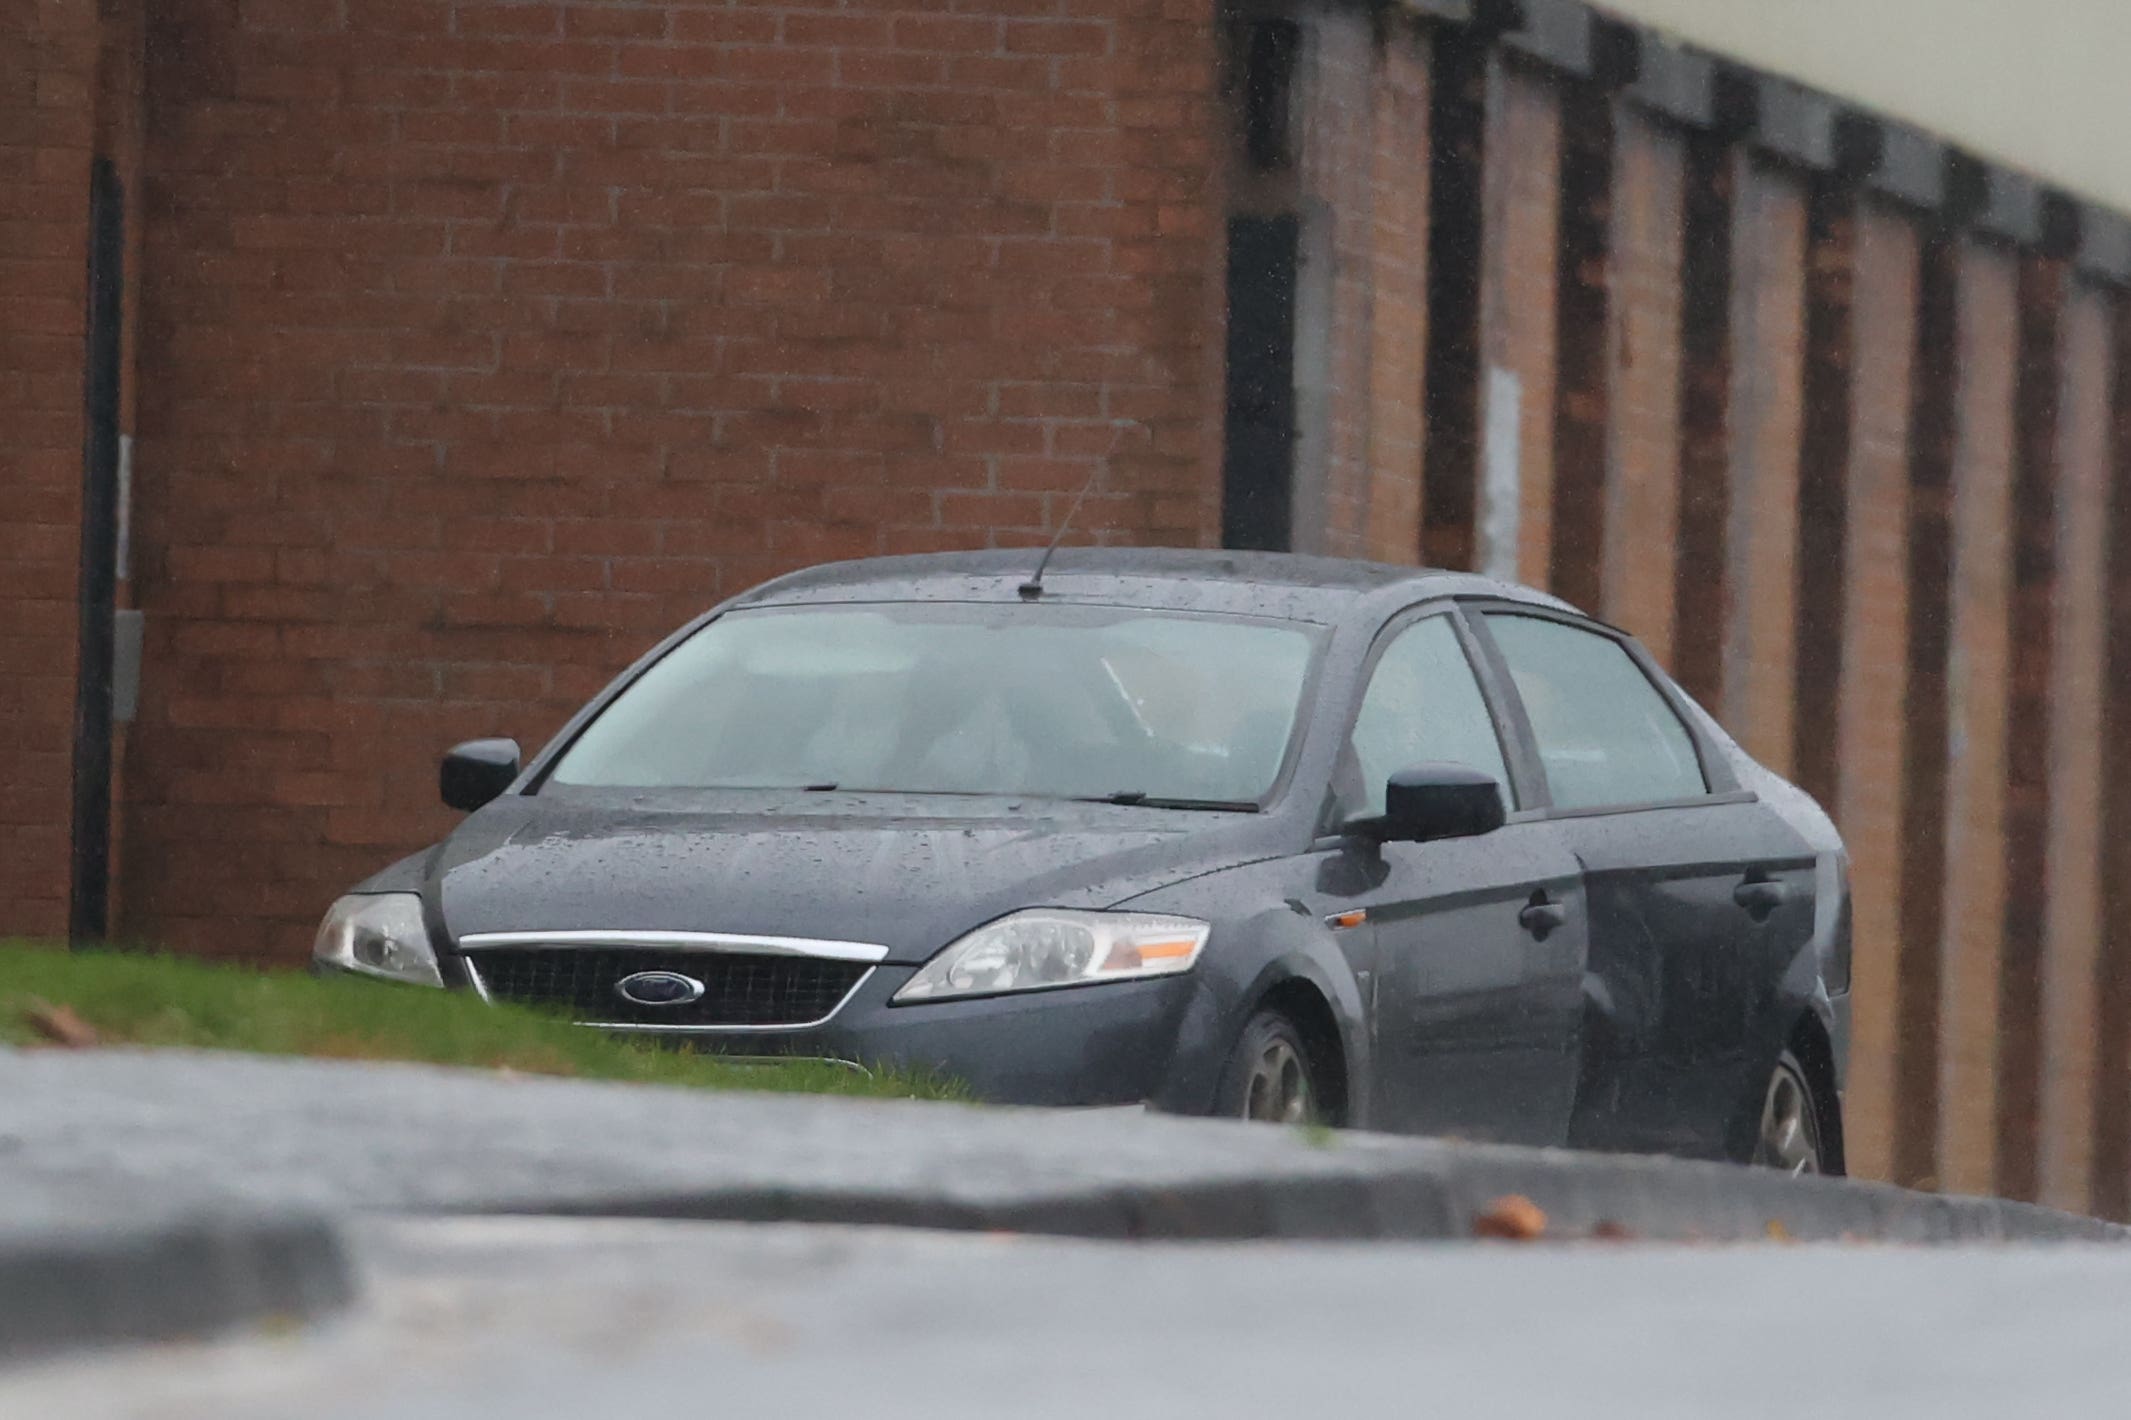 A car containing a suspect device is seen outside Waterside police station in Londonderry (Liam McBurney/PA)